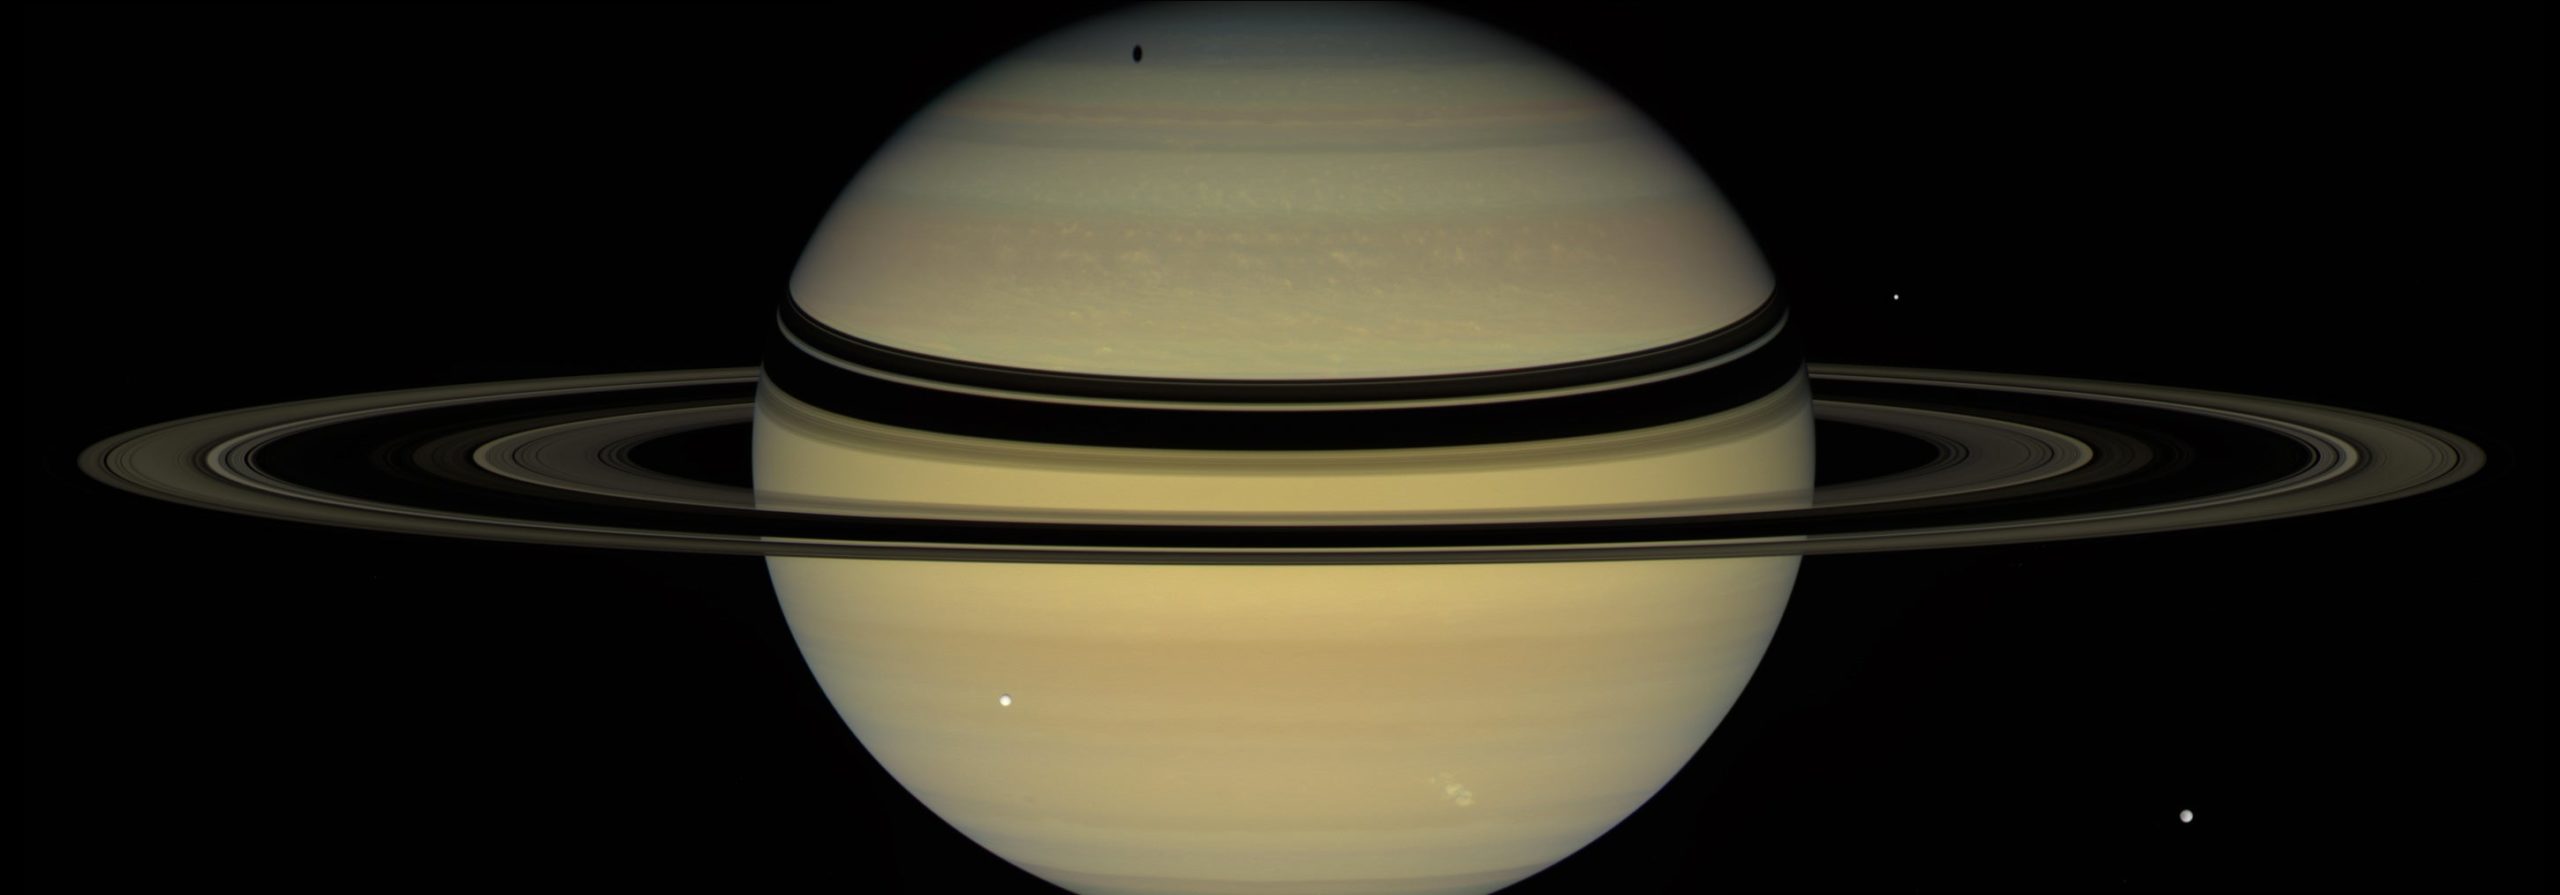 A view from NASA's Cassini spacecraft, December 6, 2007. Three moons are visible. (Image: NASA/JPL-Caltech/Space Science Institute)